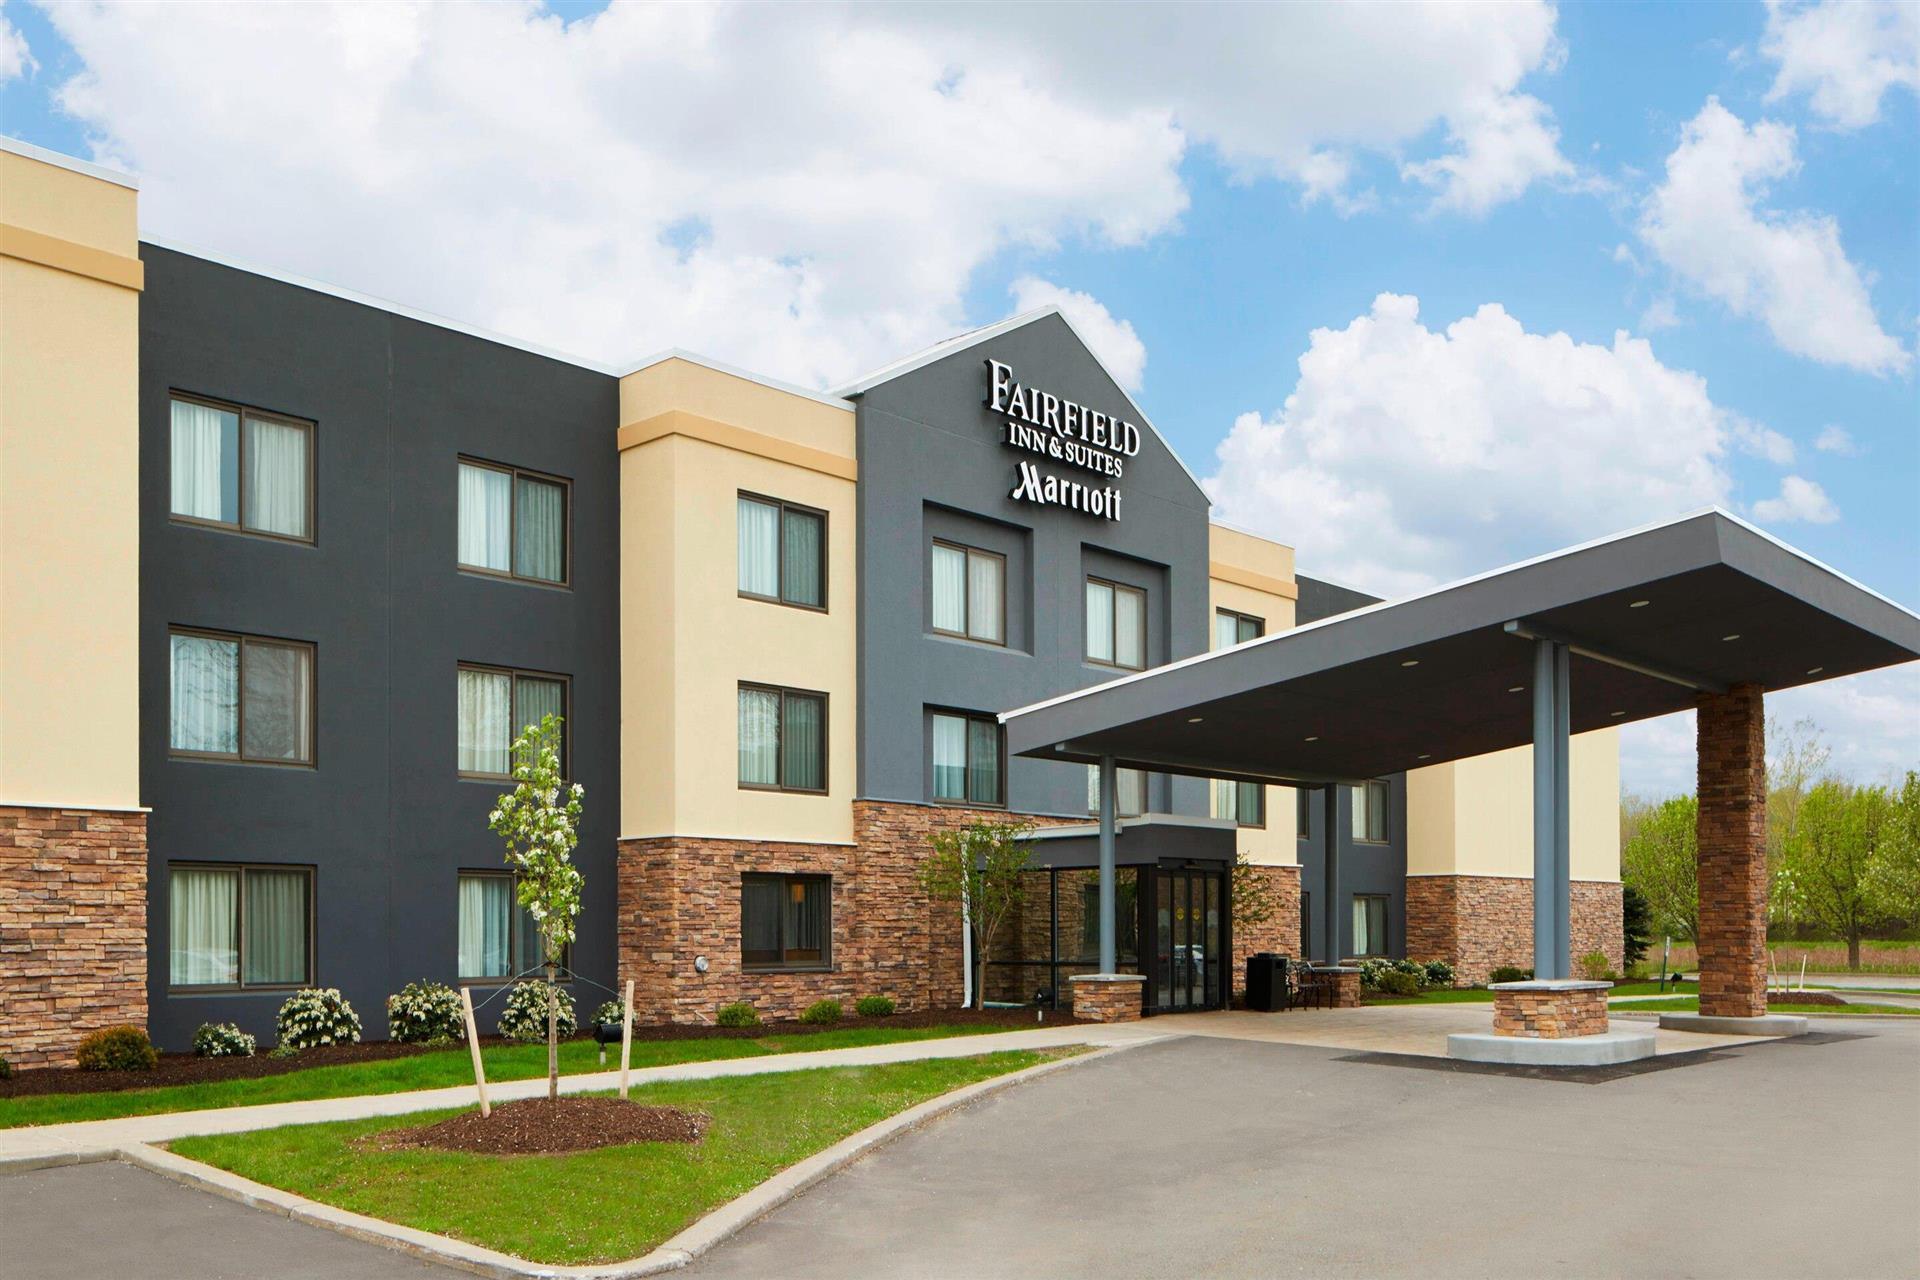 Fairfield Inn and Suites Rochester East in Webster, NY